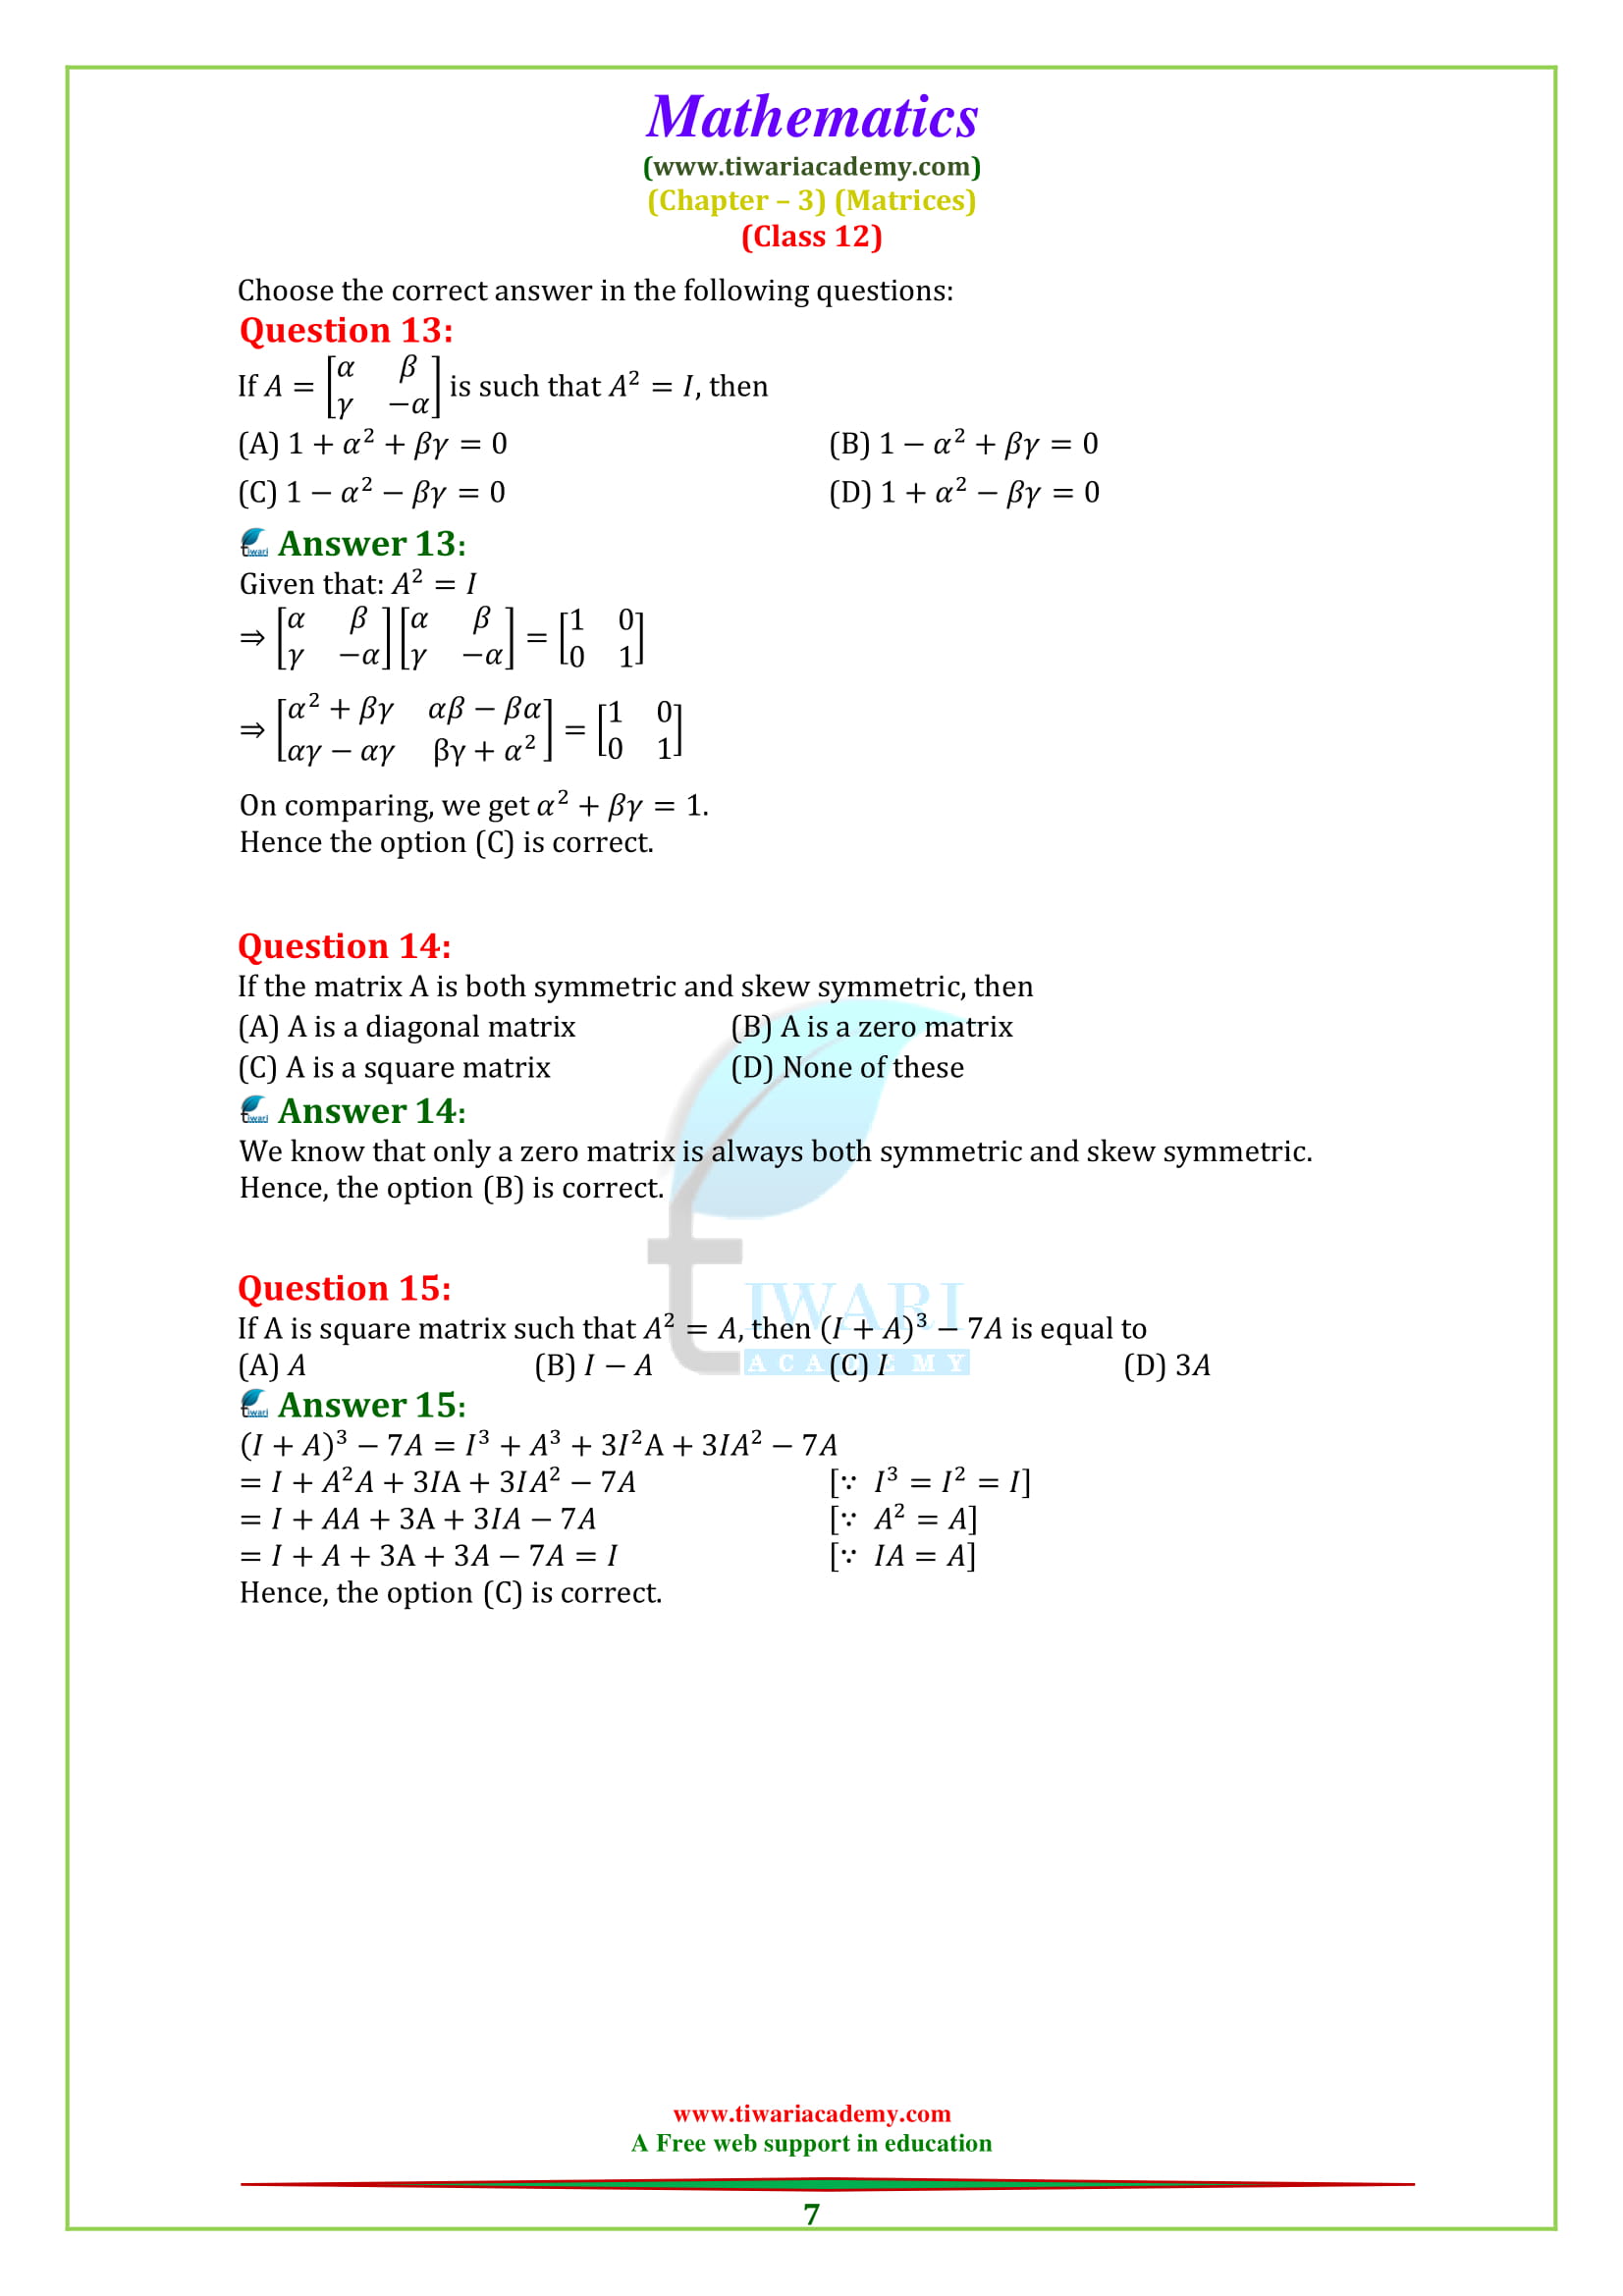 Class 12 Maths Chapter 3 Miscellaneous Exercise 3 Matrices Solutions Questions 9, 10, 11, 12, 13